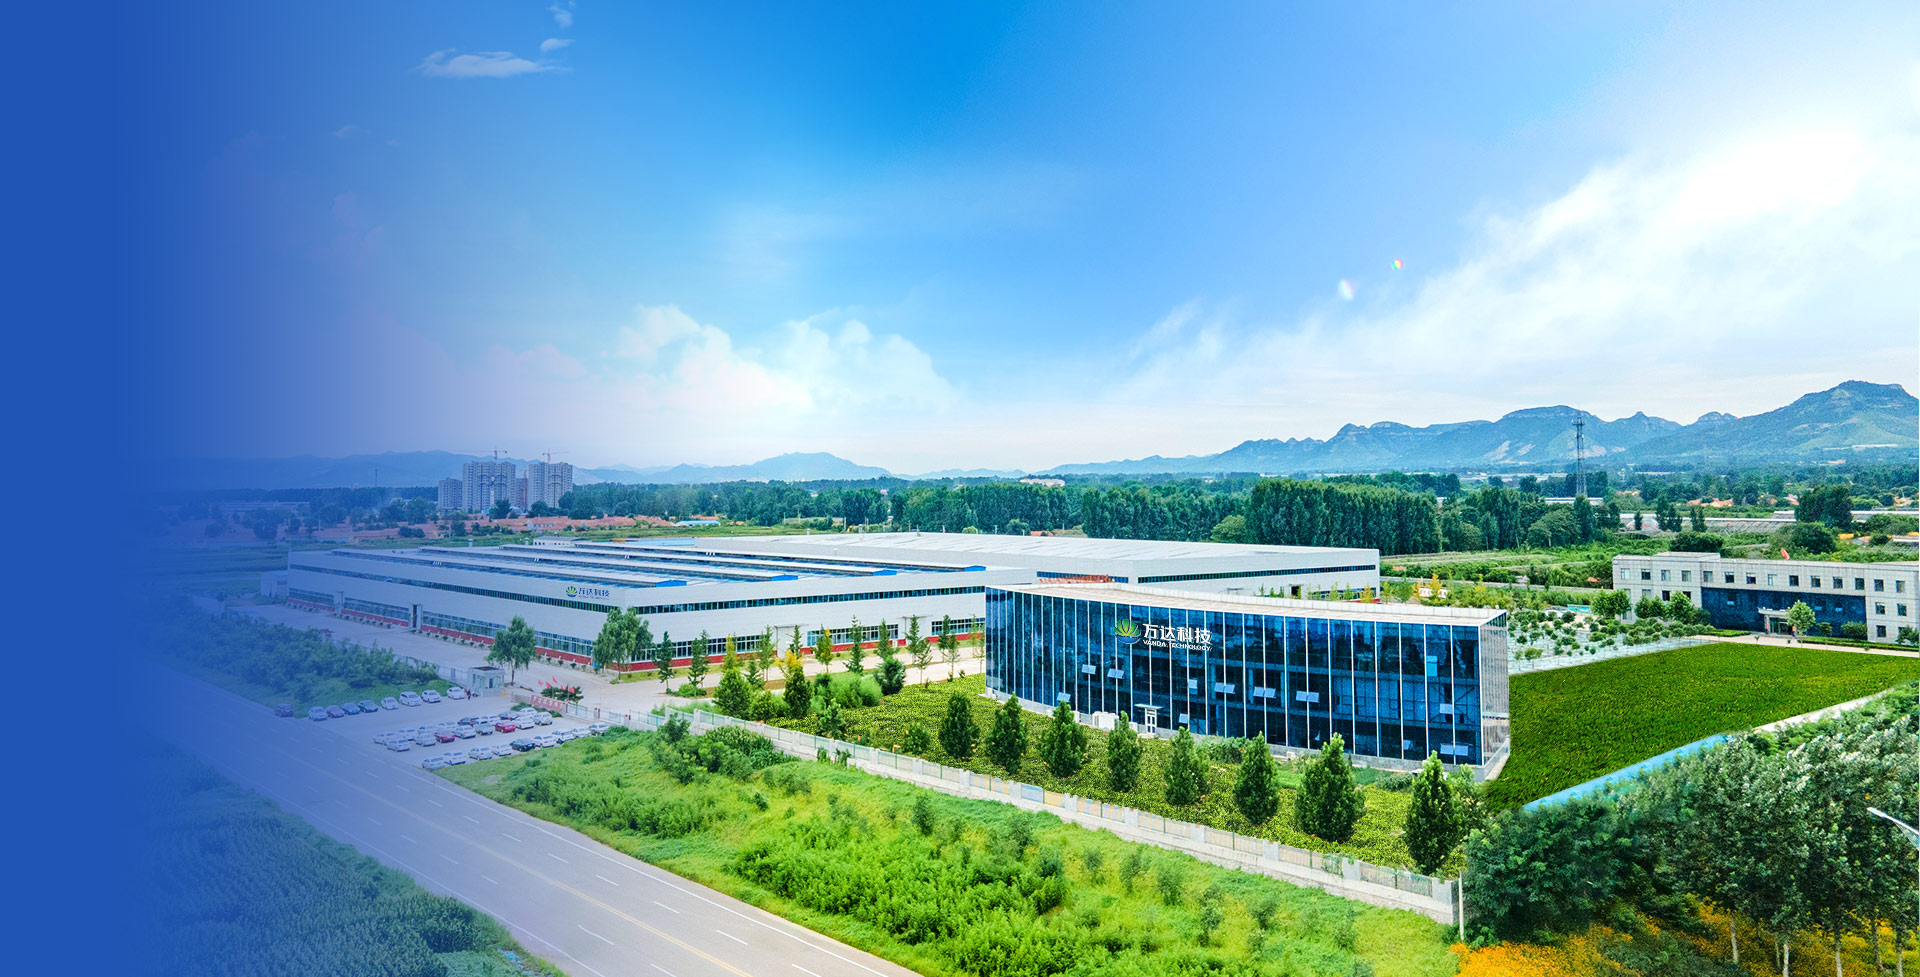 Congratulations to Wanda Technology for being selected into the national catalogue of energy-saving technology and equipment in the field of industry and information technology